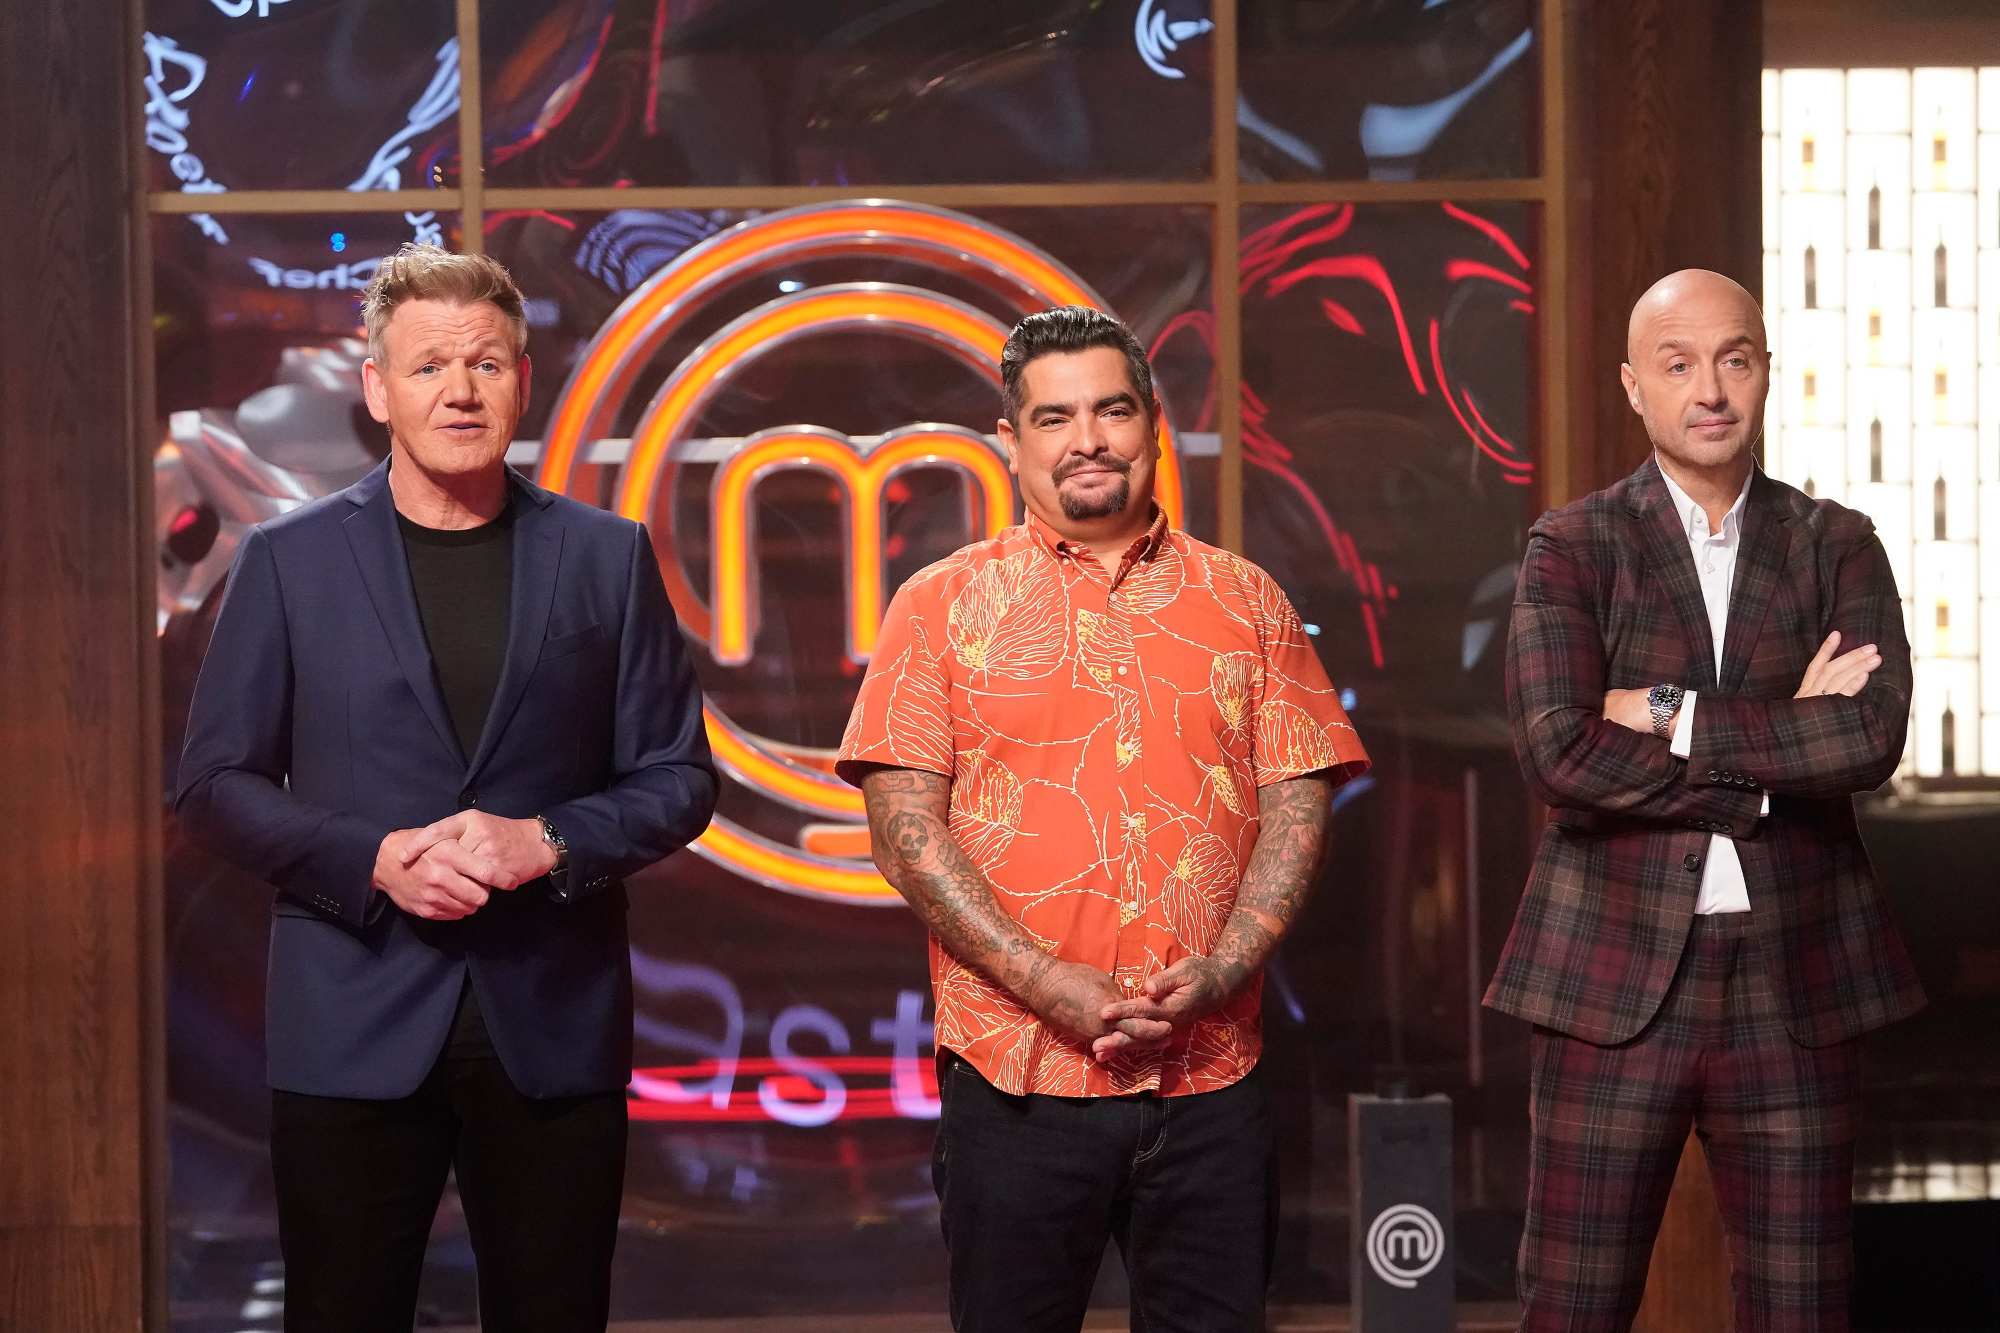 'MasterChef' judge Gordon Ramsay, Aarón Sánchez, and Joe Bastianich standing side-by-side in front of the show's logo.